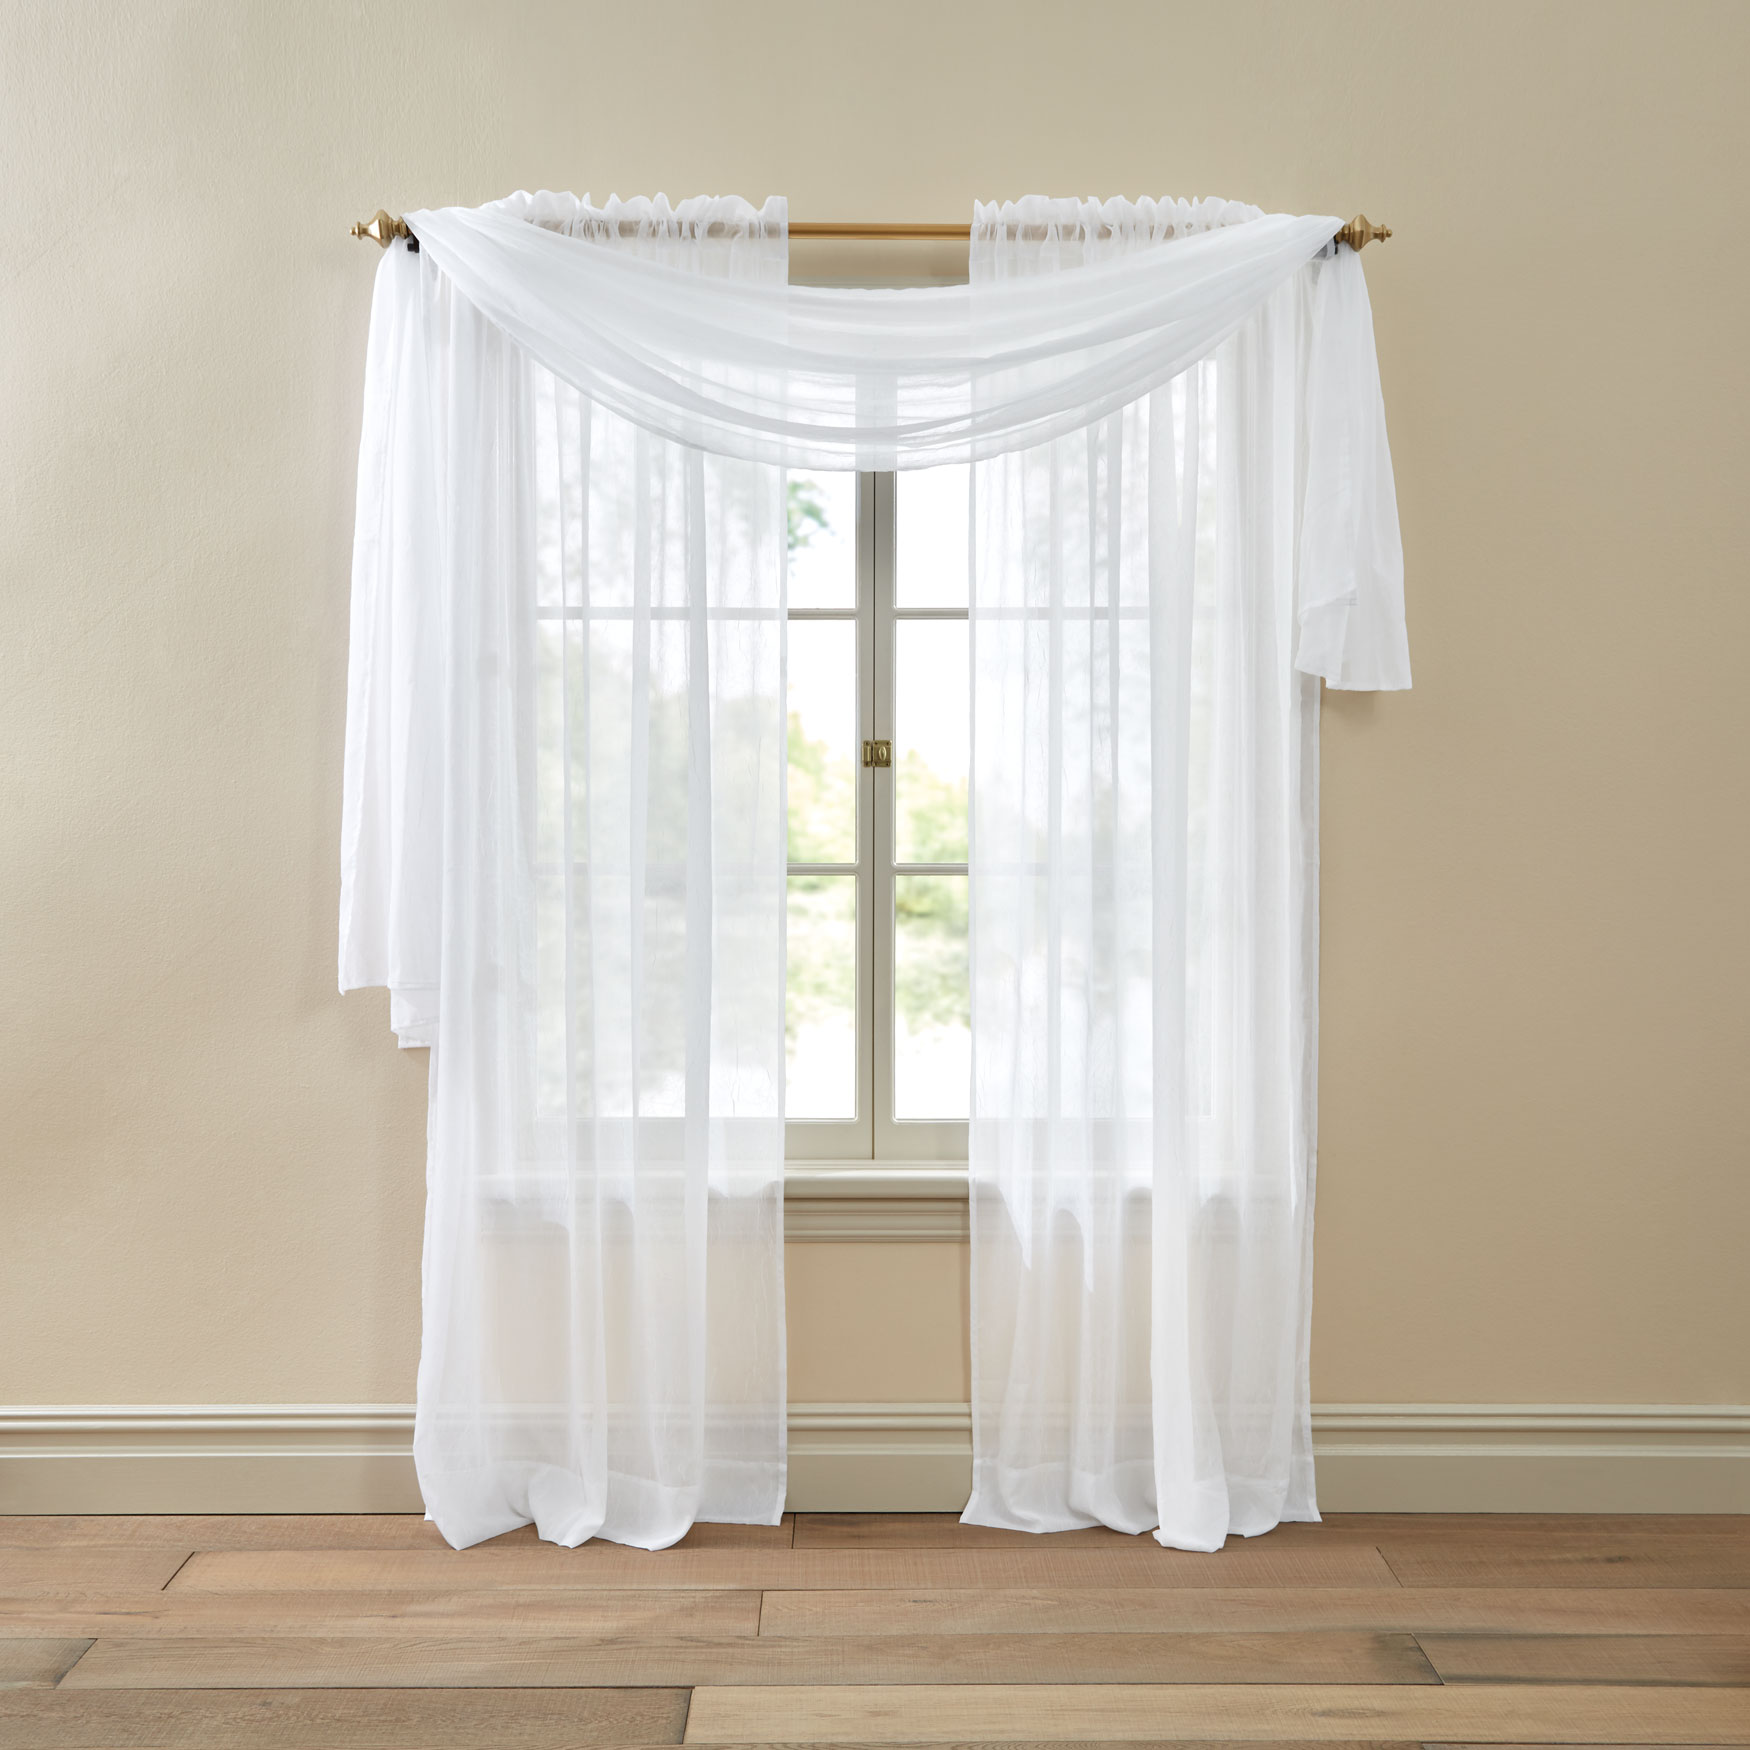 BH Studio Crushed Voile Scarf Valance, 